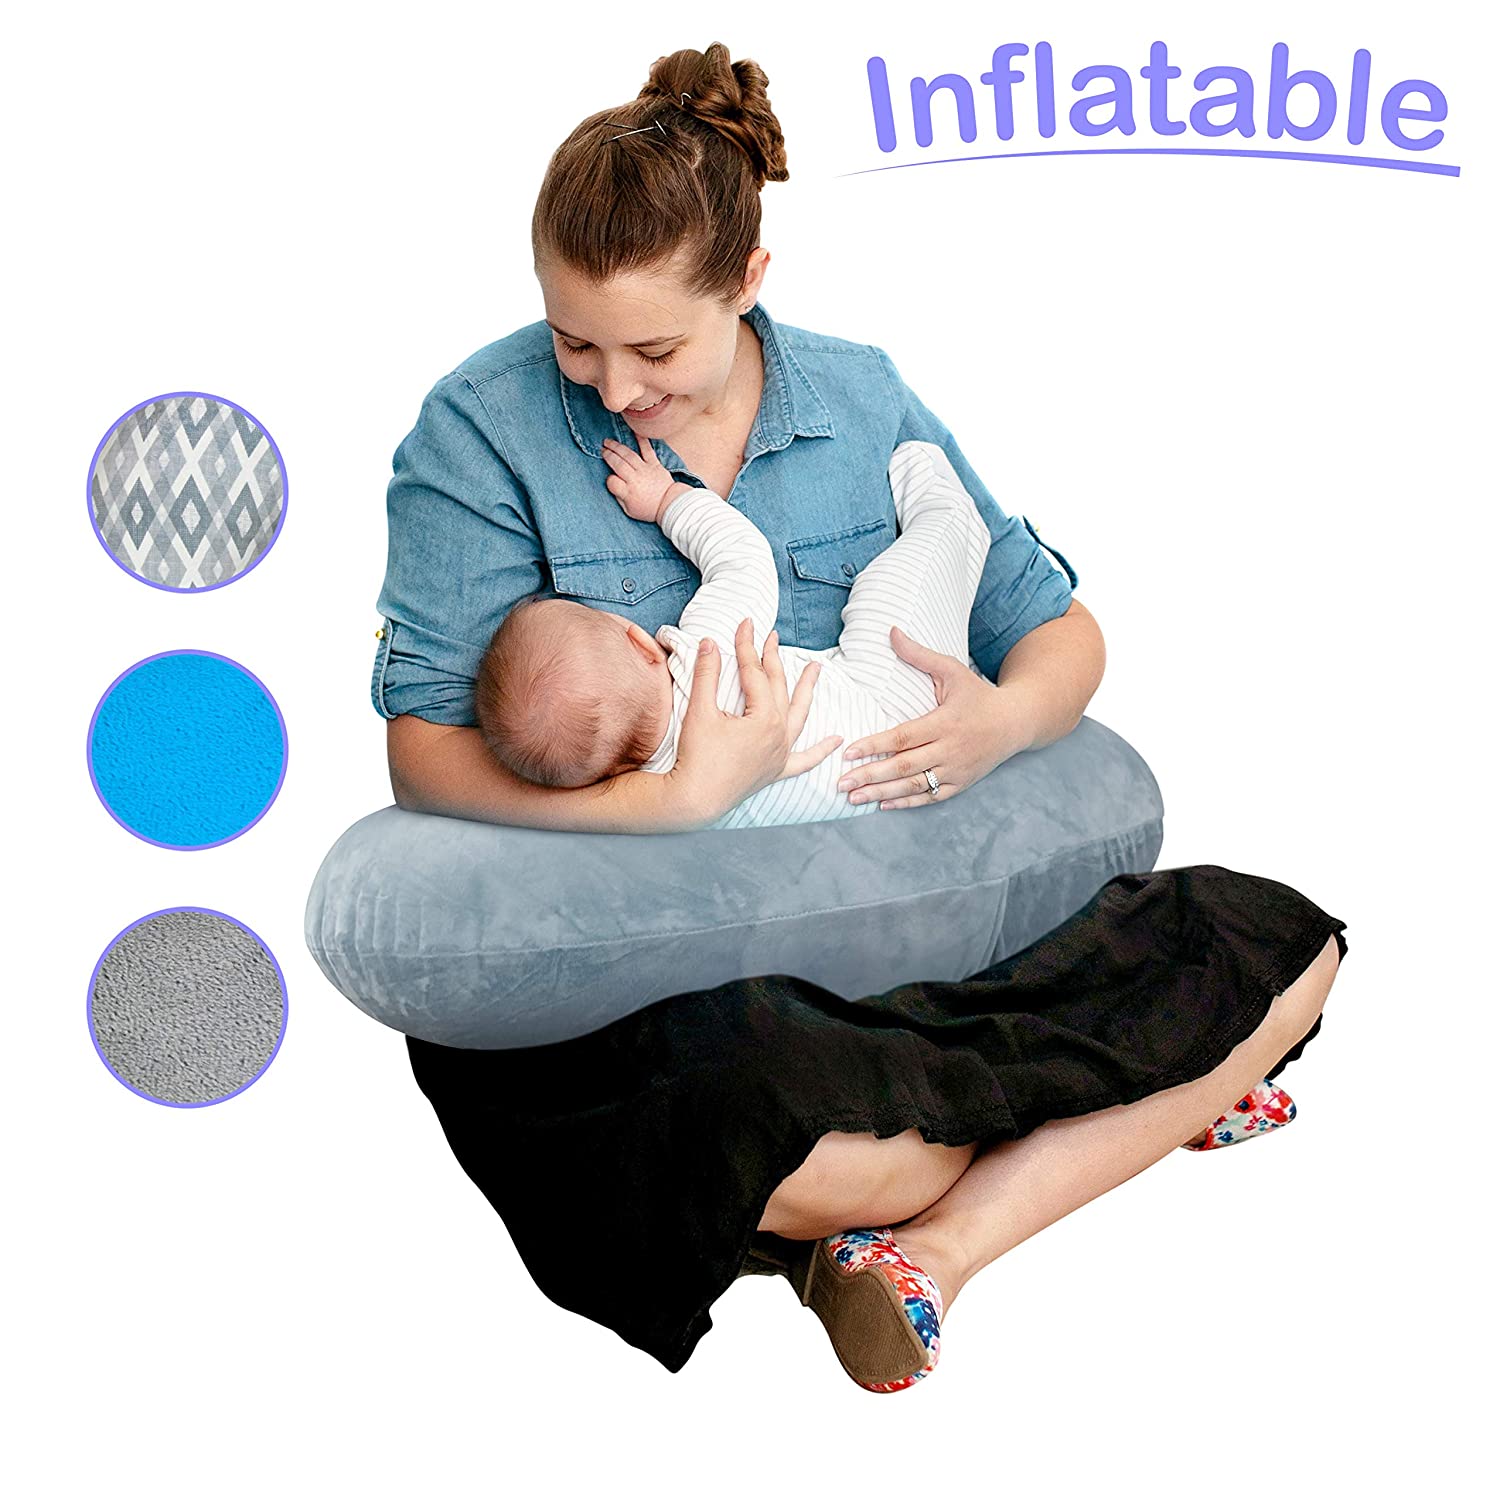 The Original Inflatable Nursing Pillow with Slipcover: Portable Breastfeeding Support Cushion with Removable Plush Minky Cover